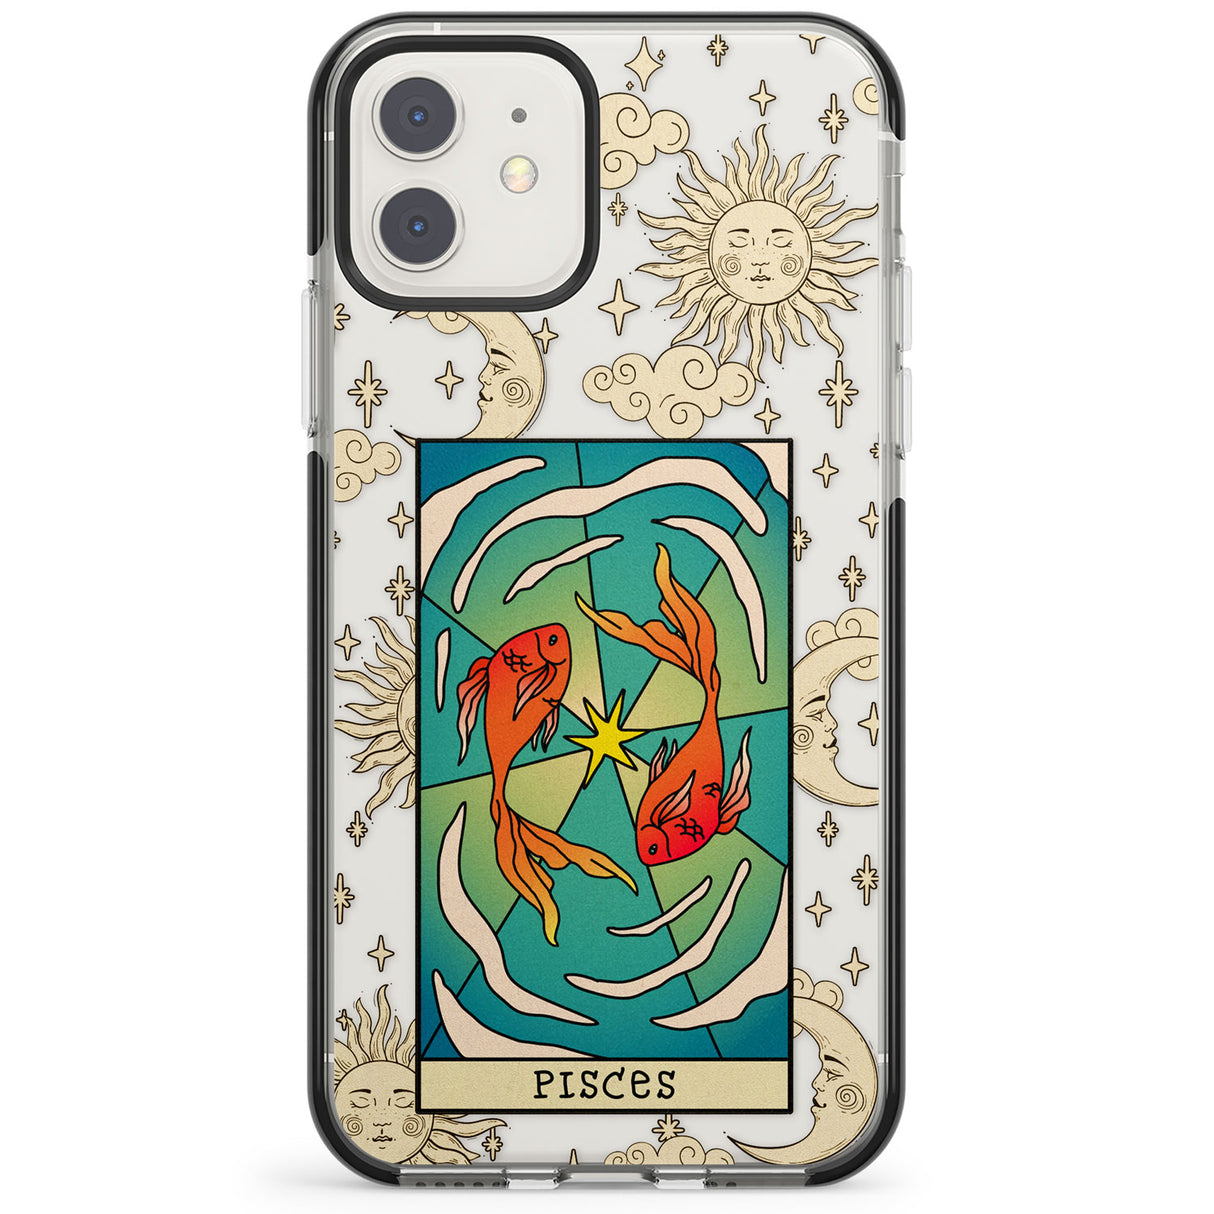 Celestial Zodiac - Pisces Impact Phone Case for iPhone 11, iphone 12